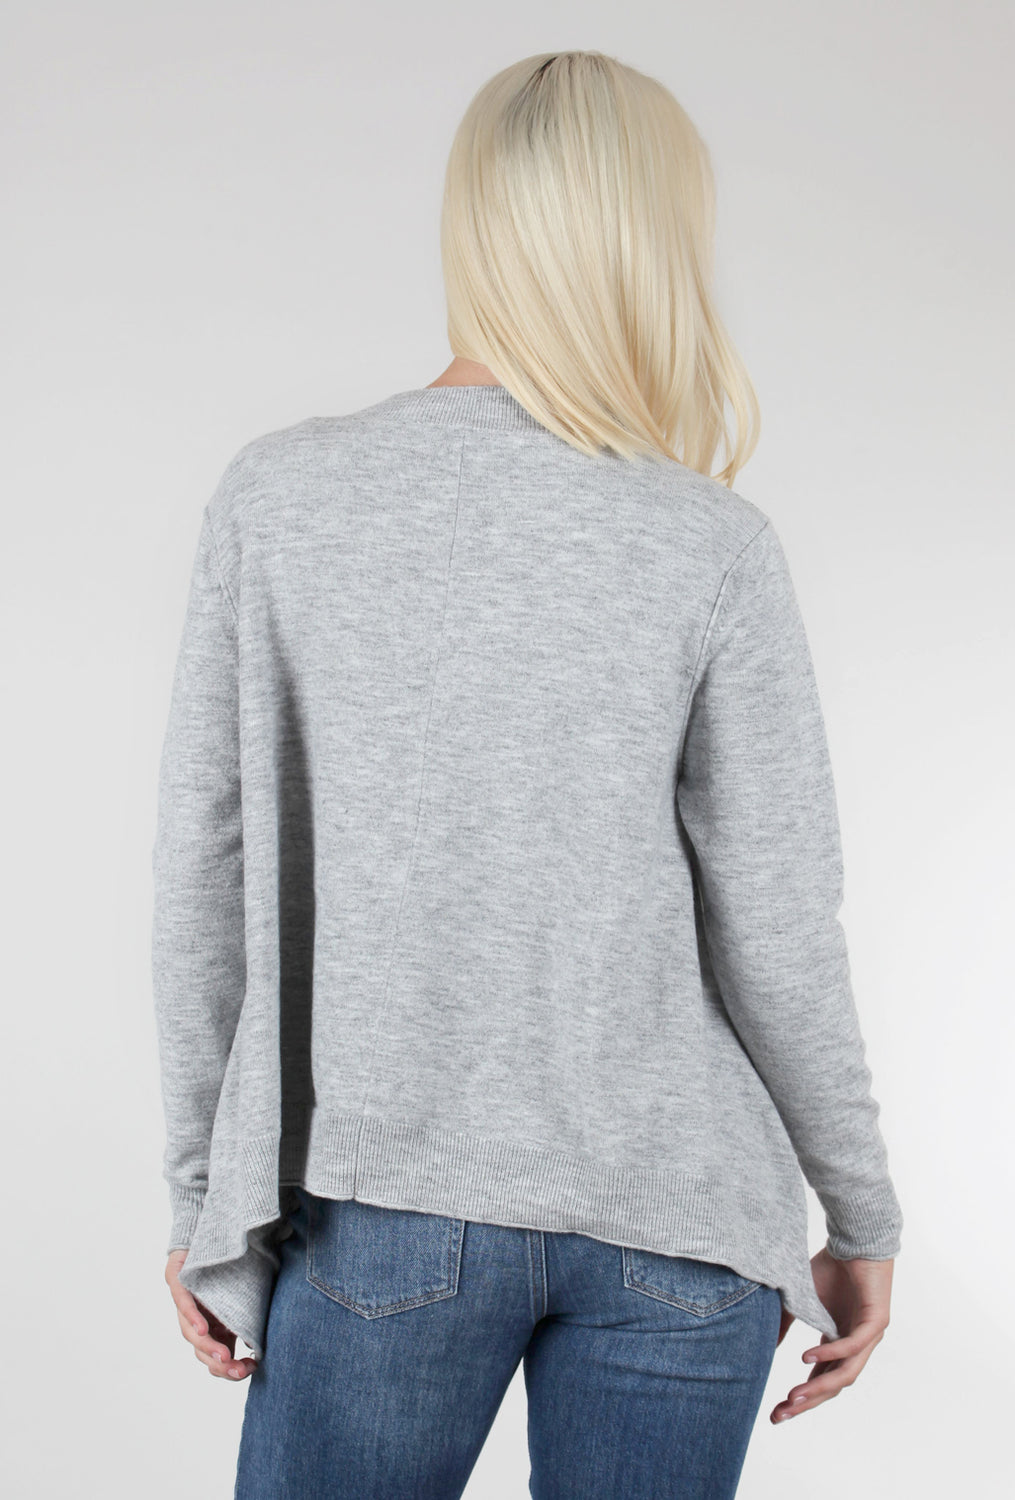 Notched-Details Cardigan, Light Gray